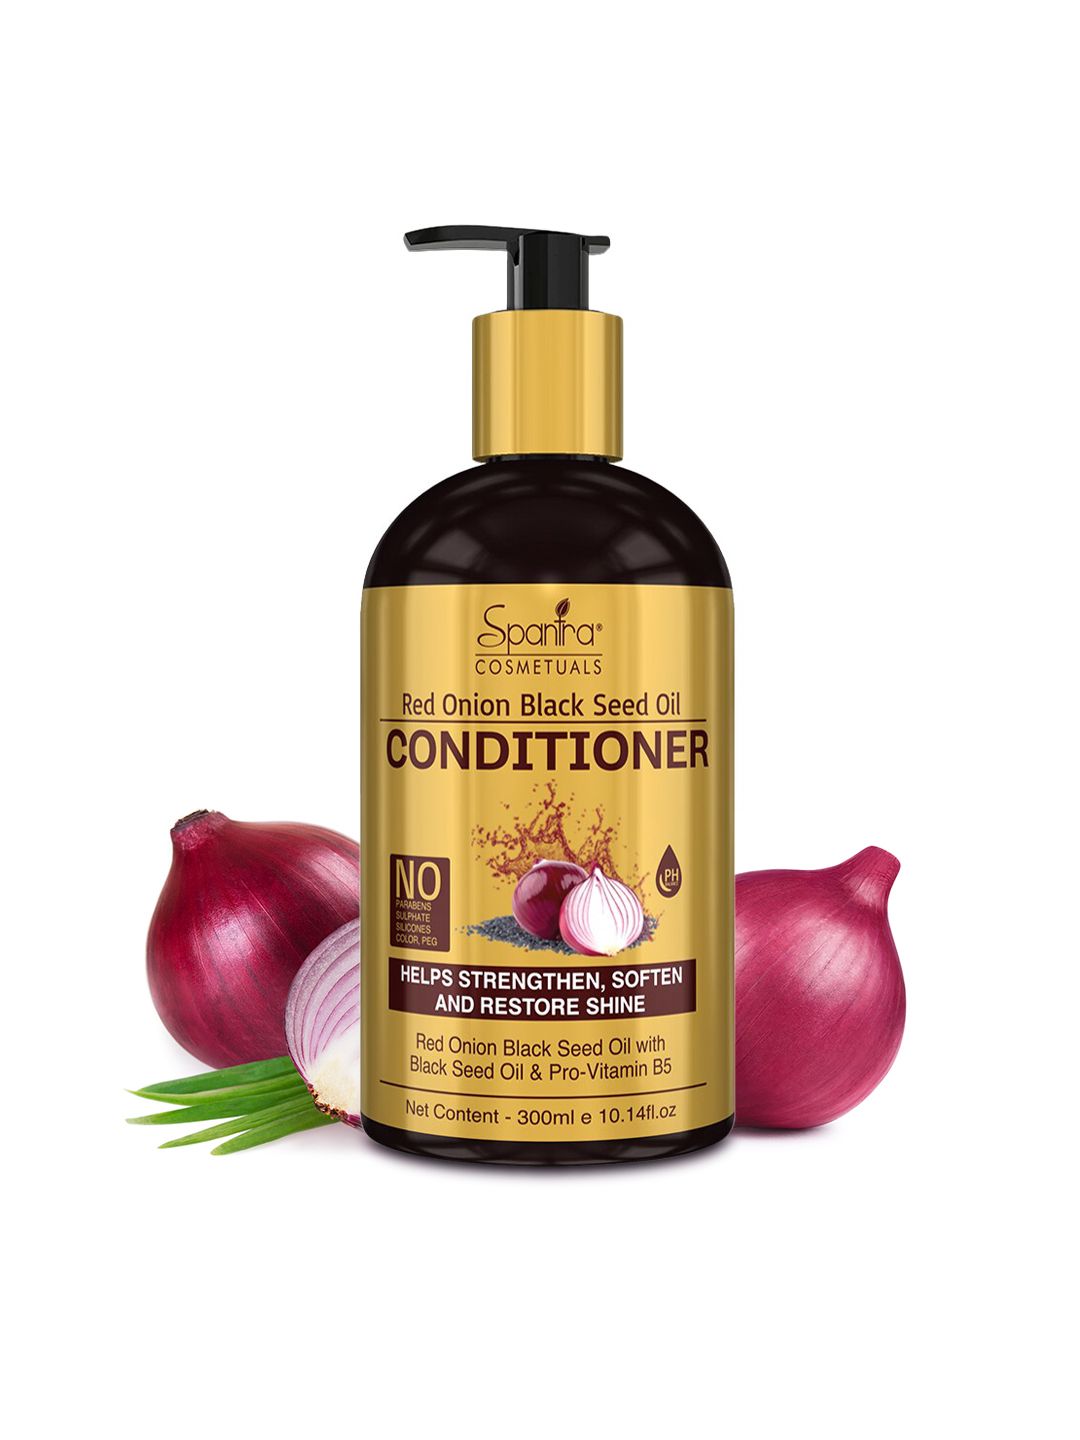 Spantra Red Onion Black seed Oil Conditioner with Onion Oil Extract,300ml Price in India